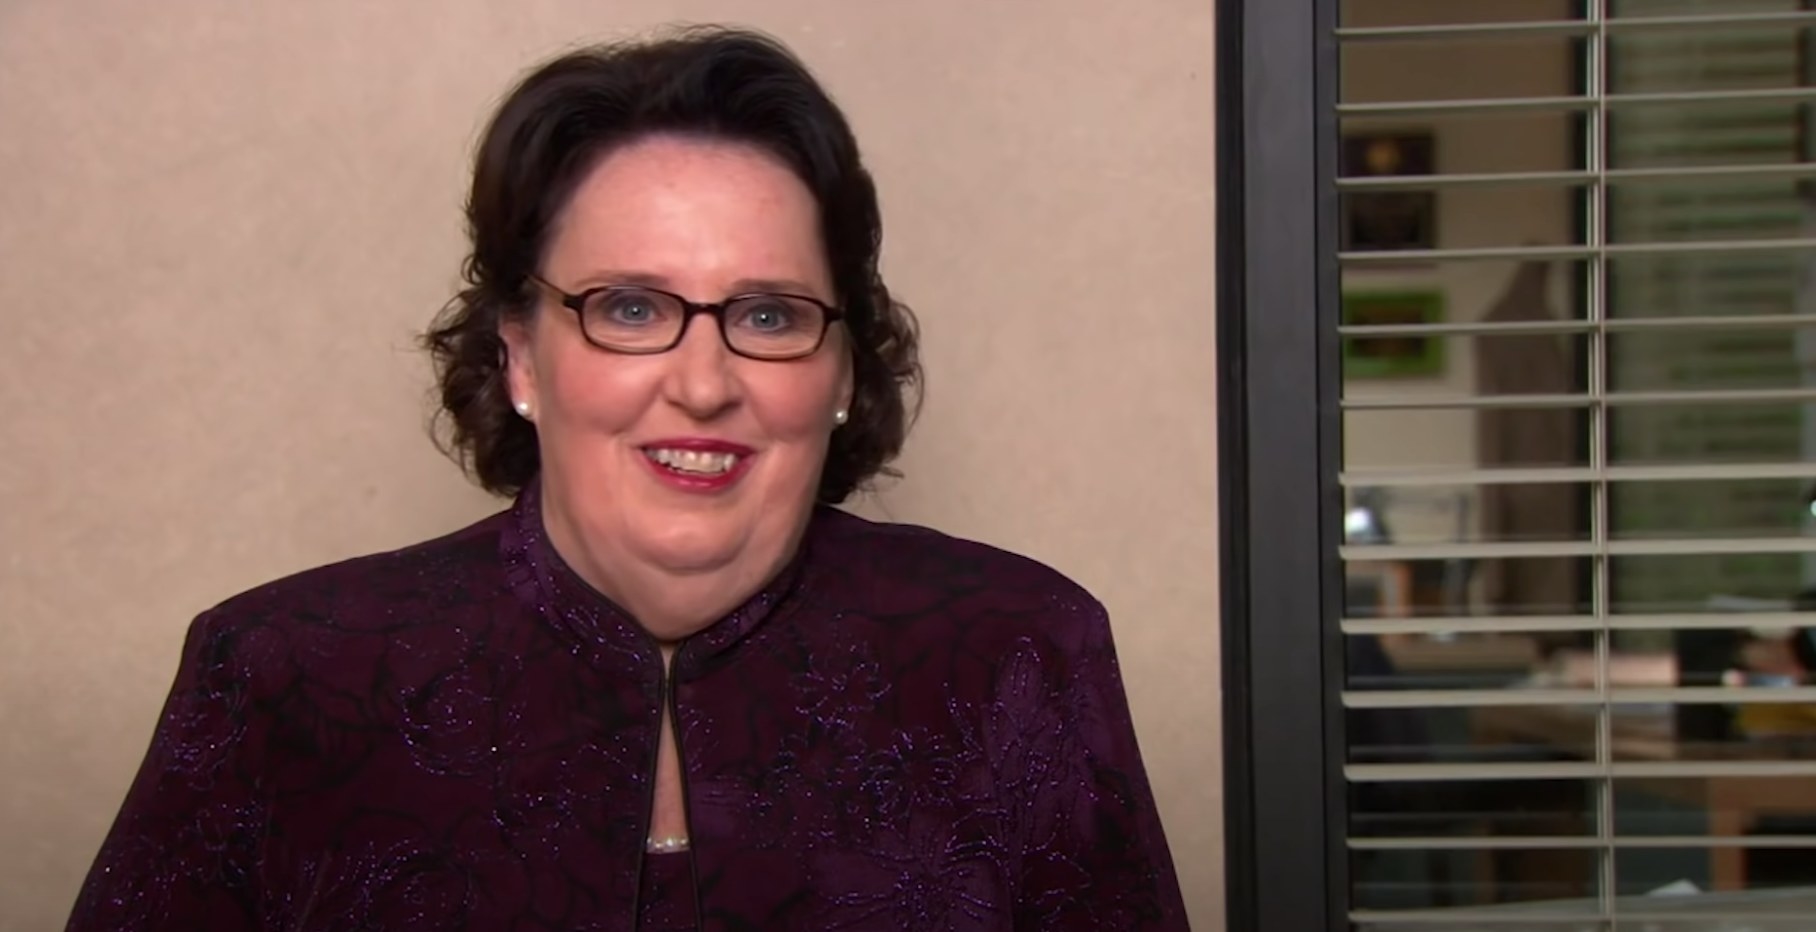 Phyllis on The Office